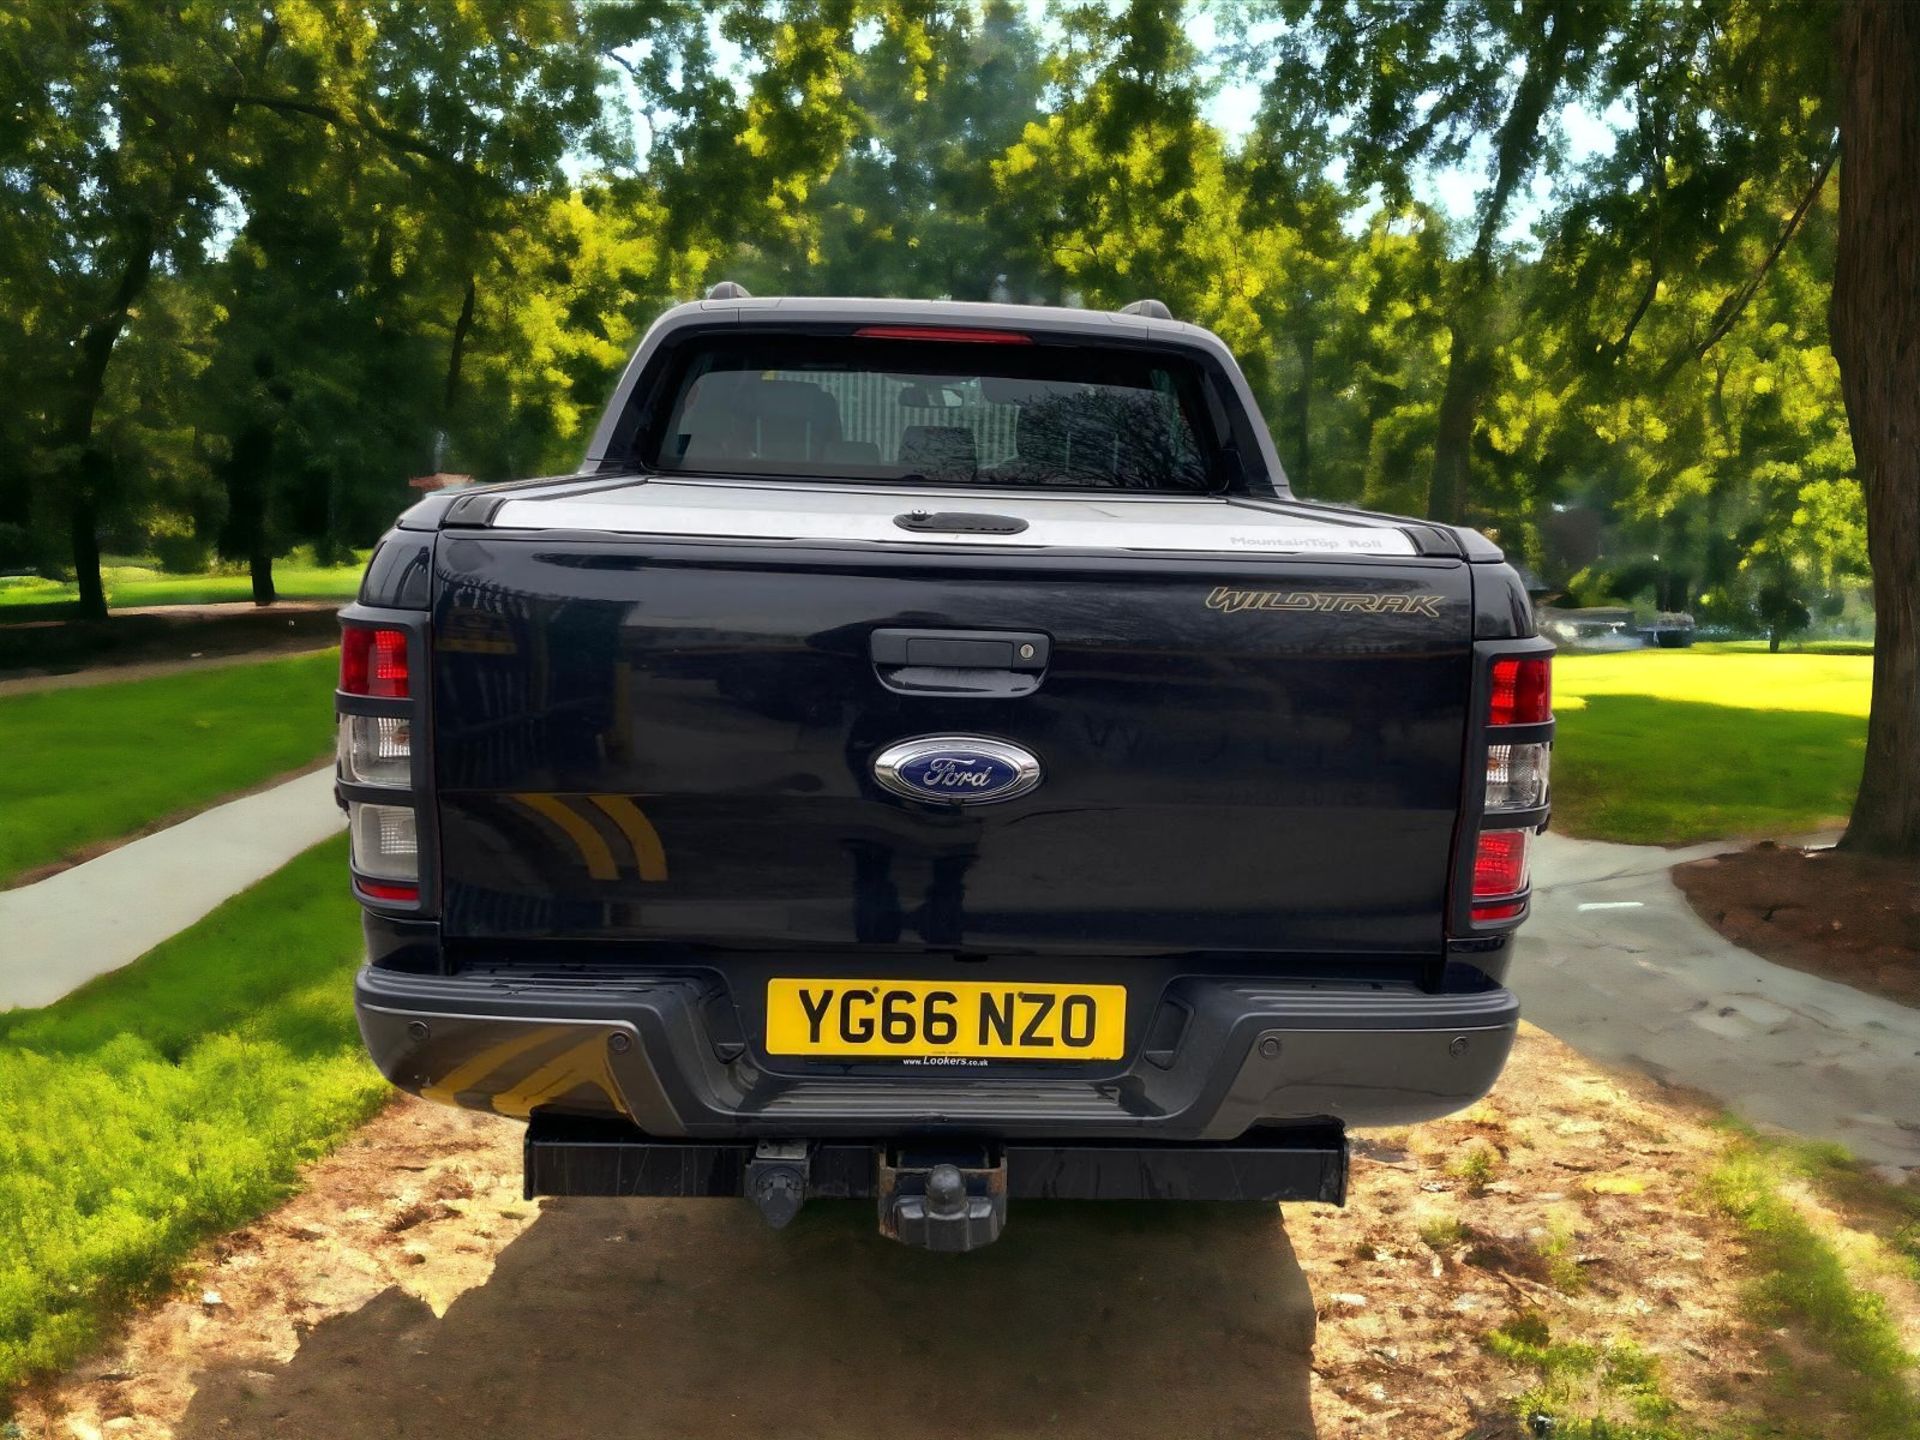 2016 FORD RANGER 3.2 TDCI WILDTRAK AUTO DOUBLE CAB 4X4 >>--NO VAT ON HAMMER--<< - Image 5 of 12